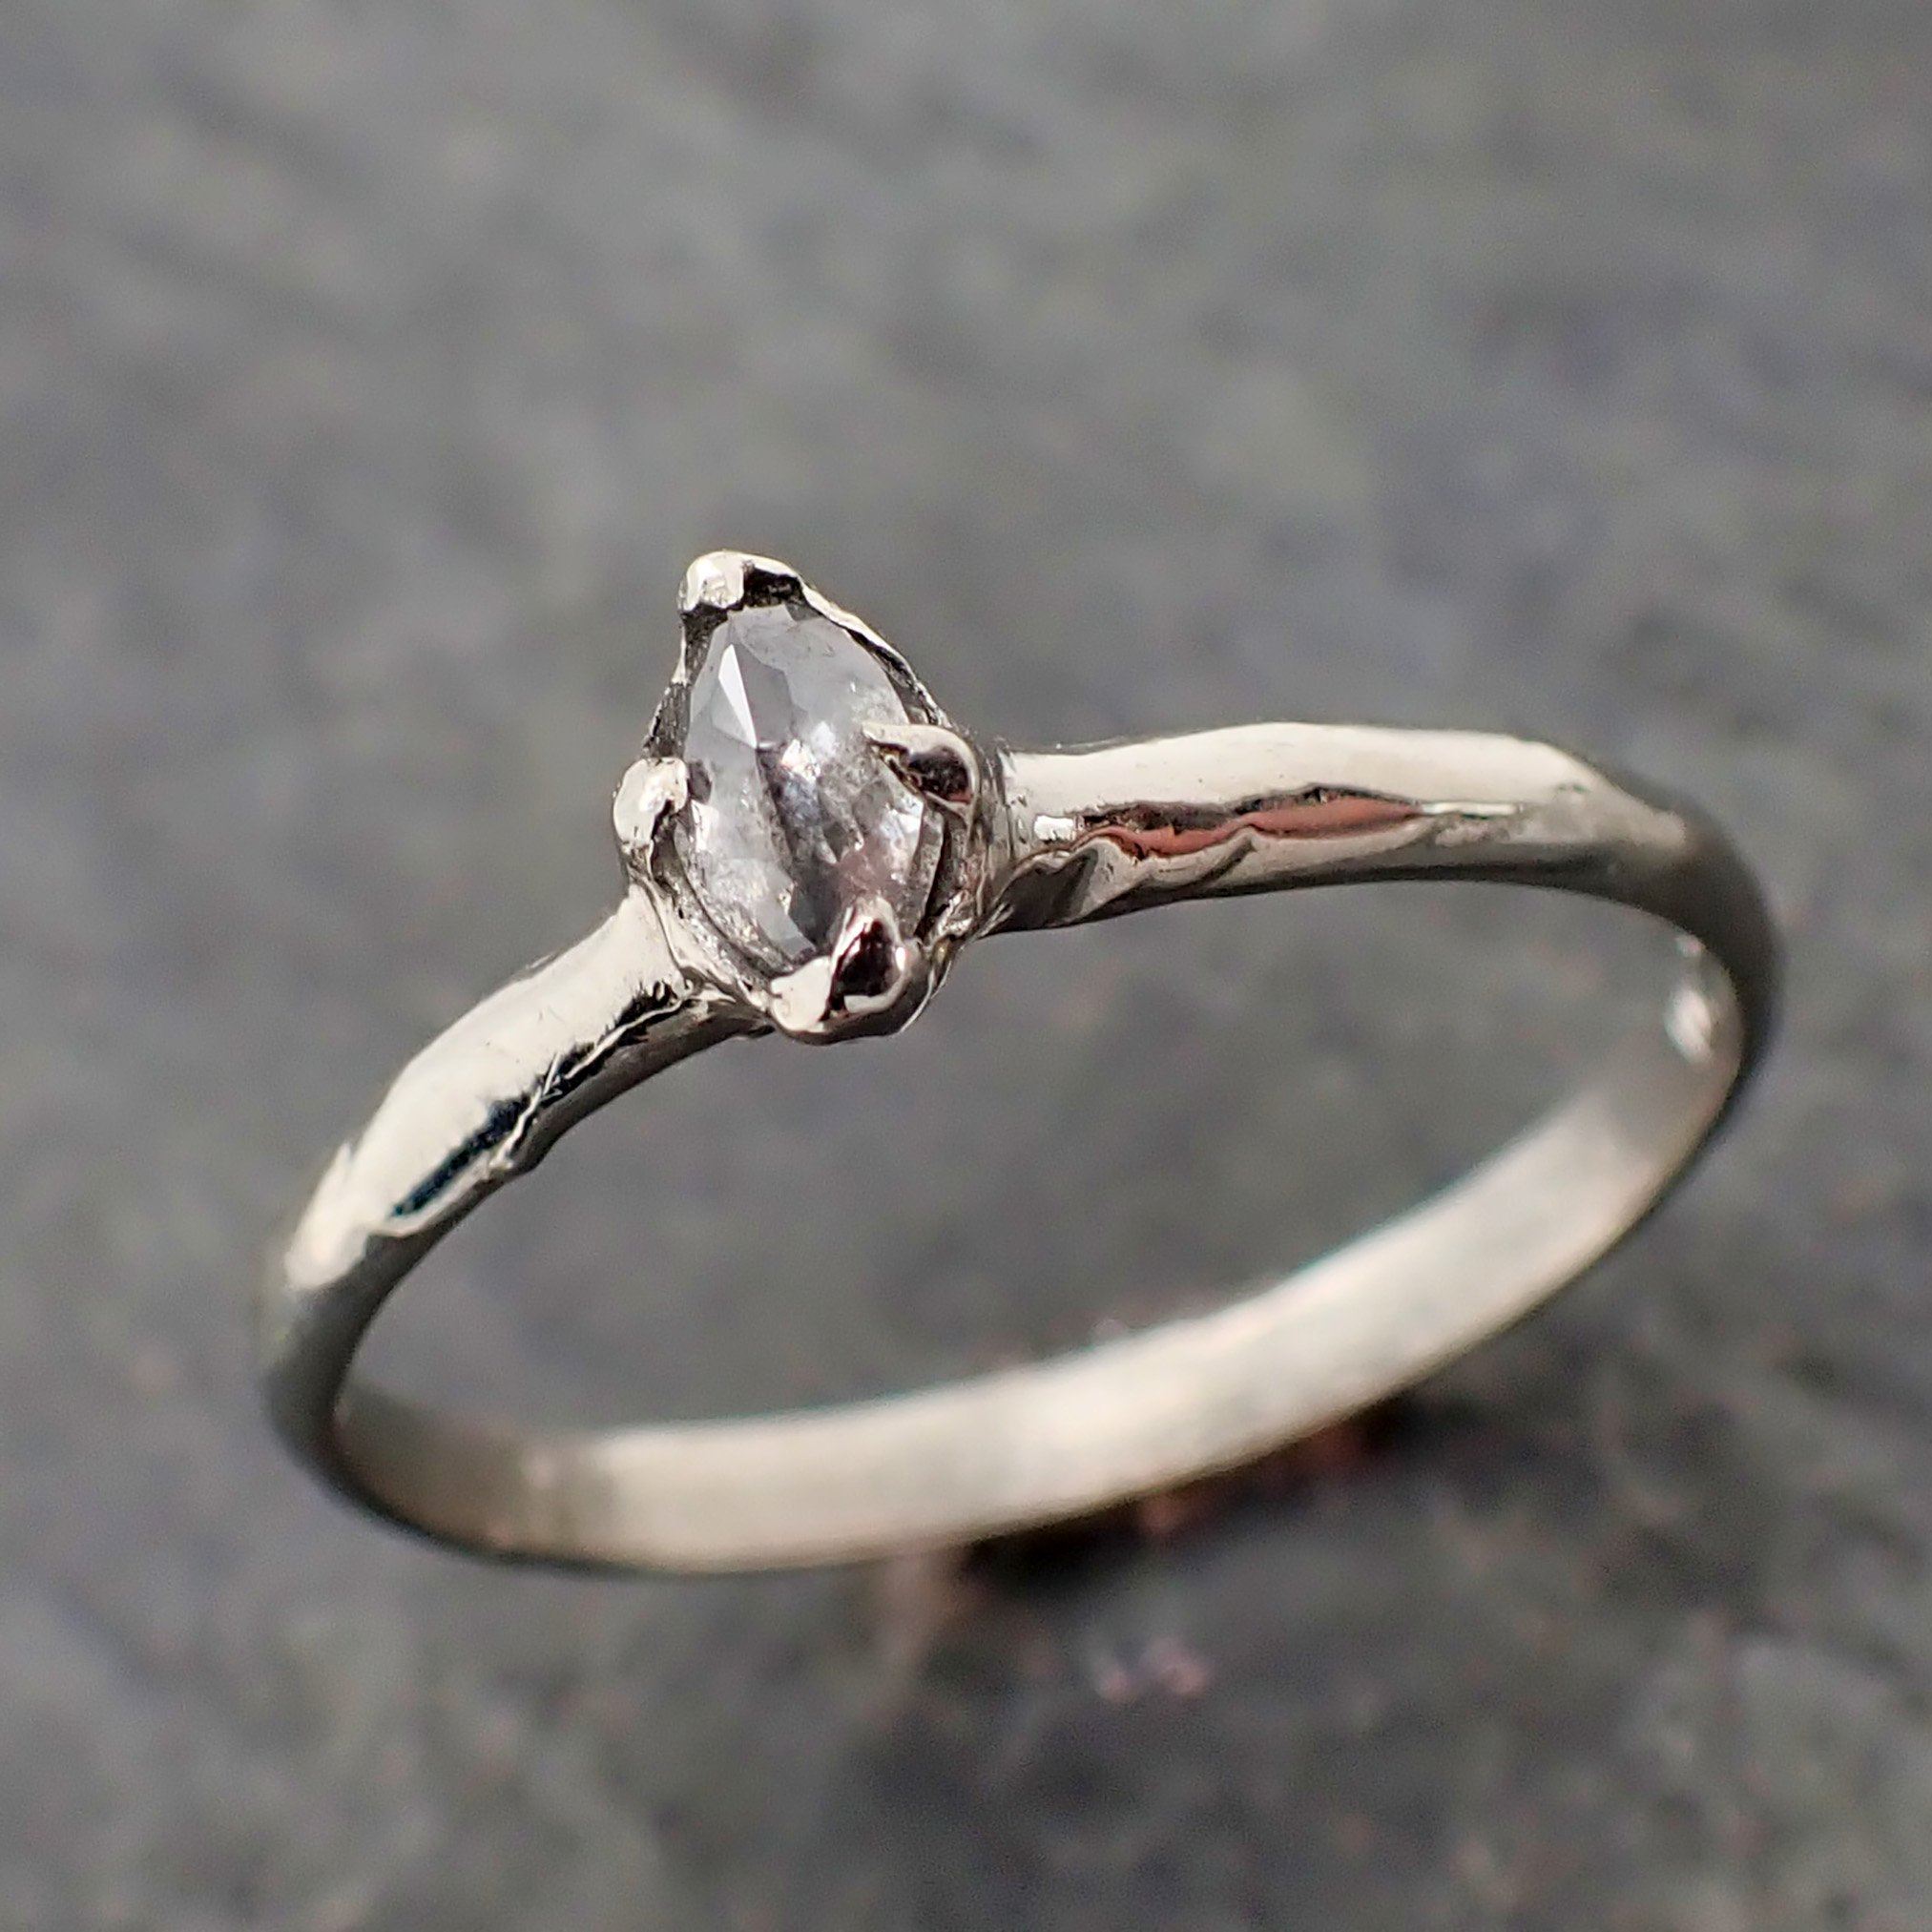 Faceted Fancy cut white Diamond Solitaire Engagement 14k White Gold Wedding Ring byAngeline 2182